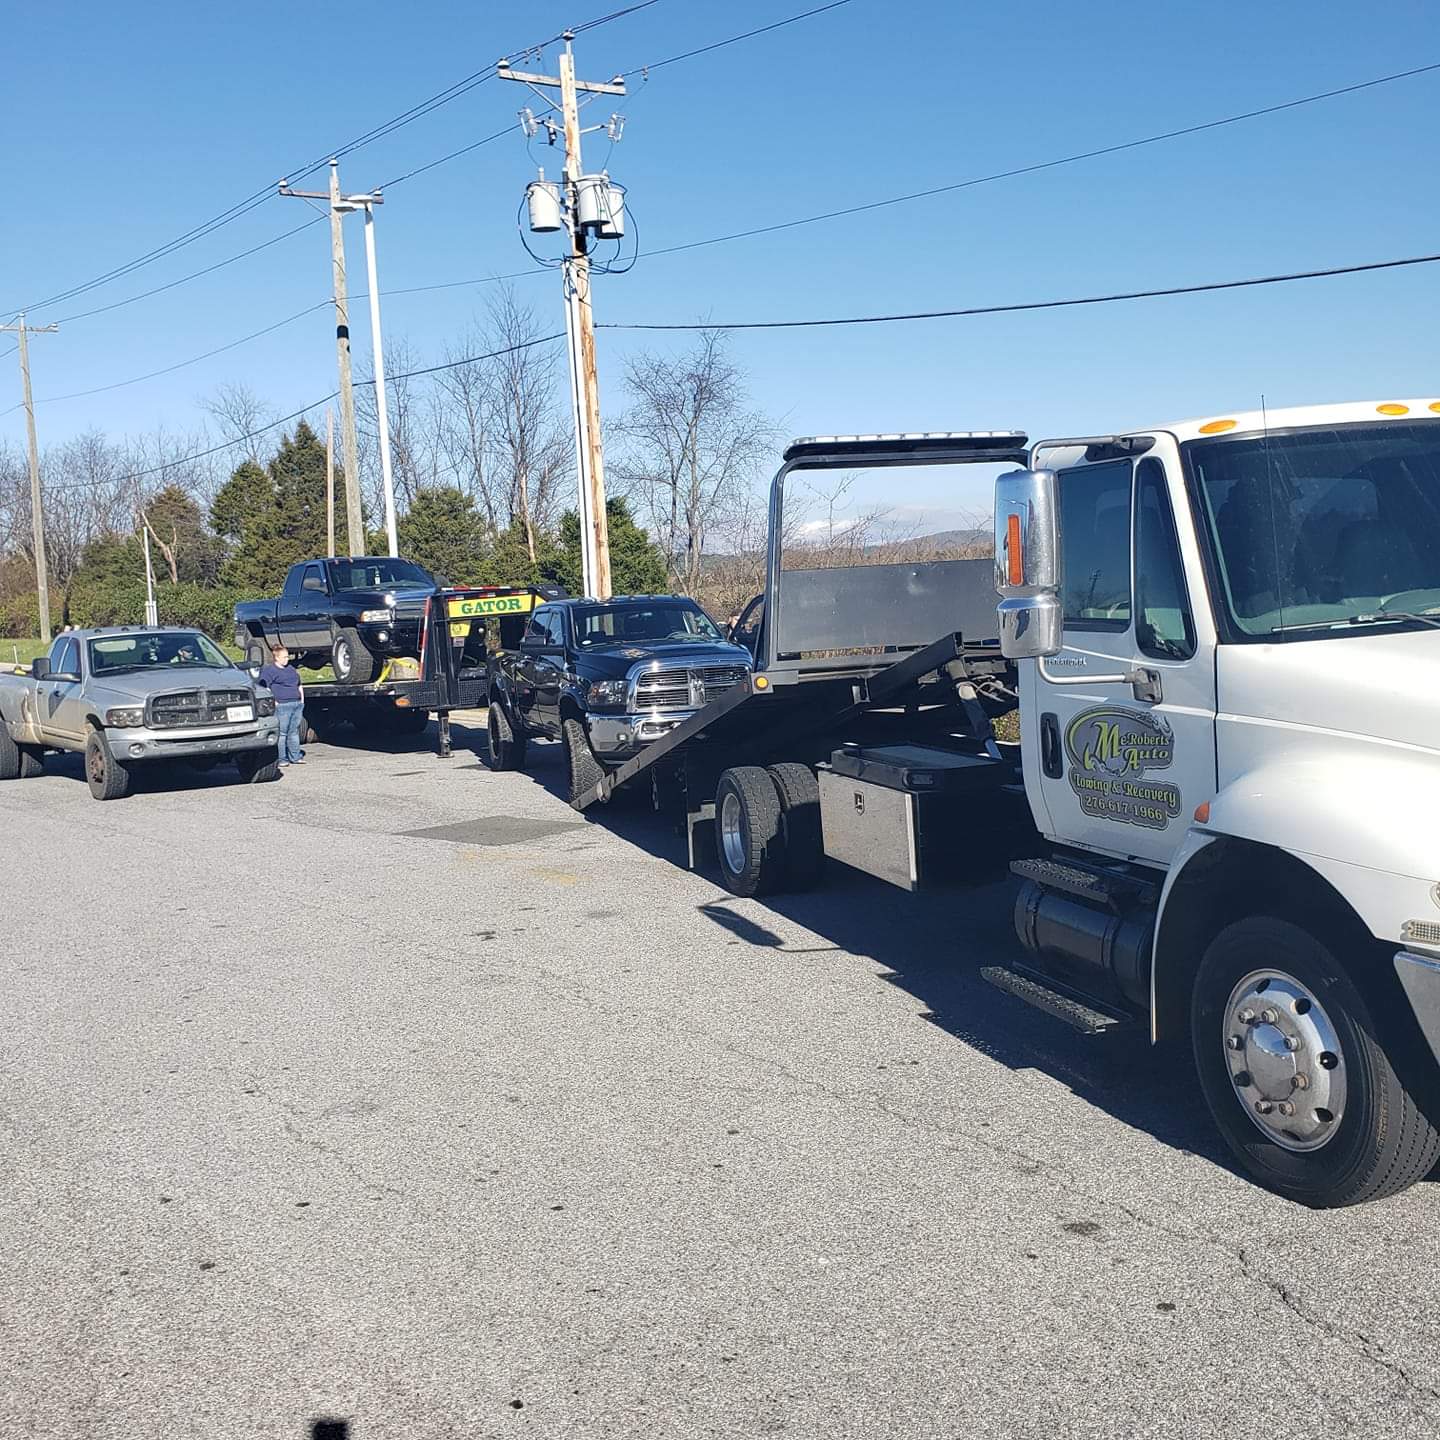 McRoberts Auto Towing and recovery